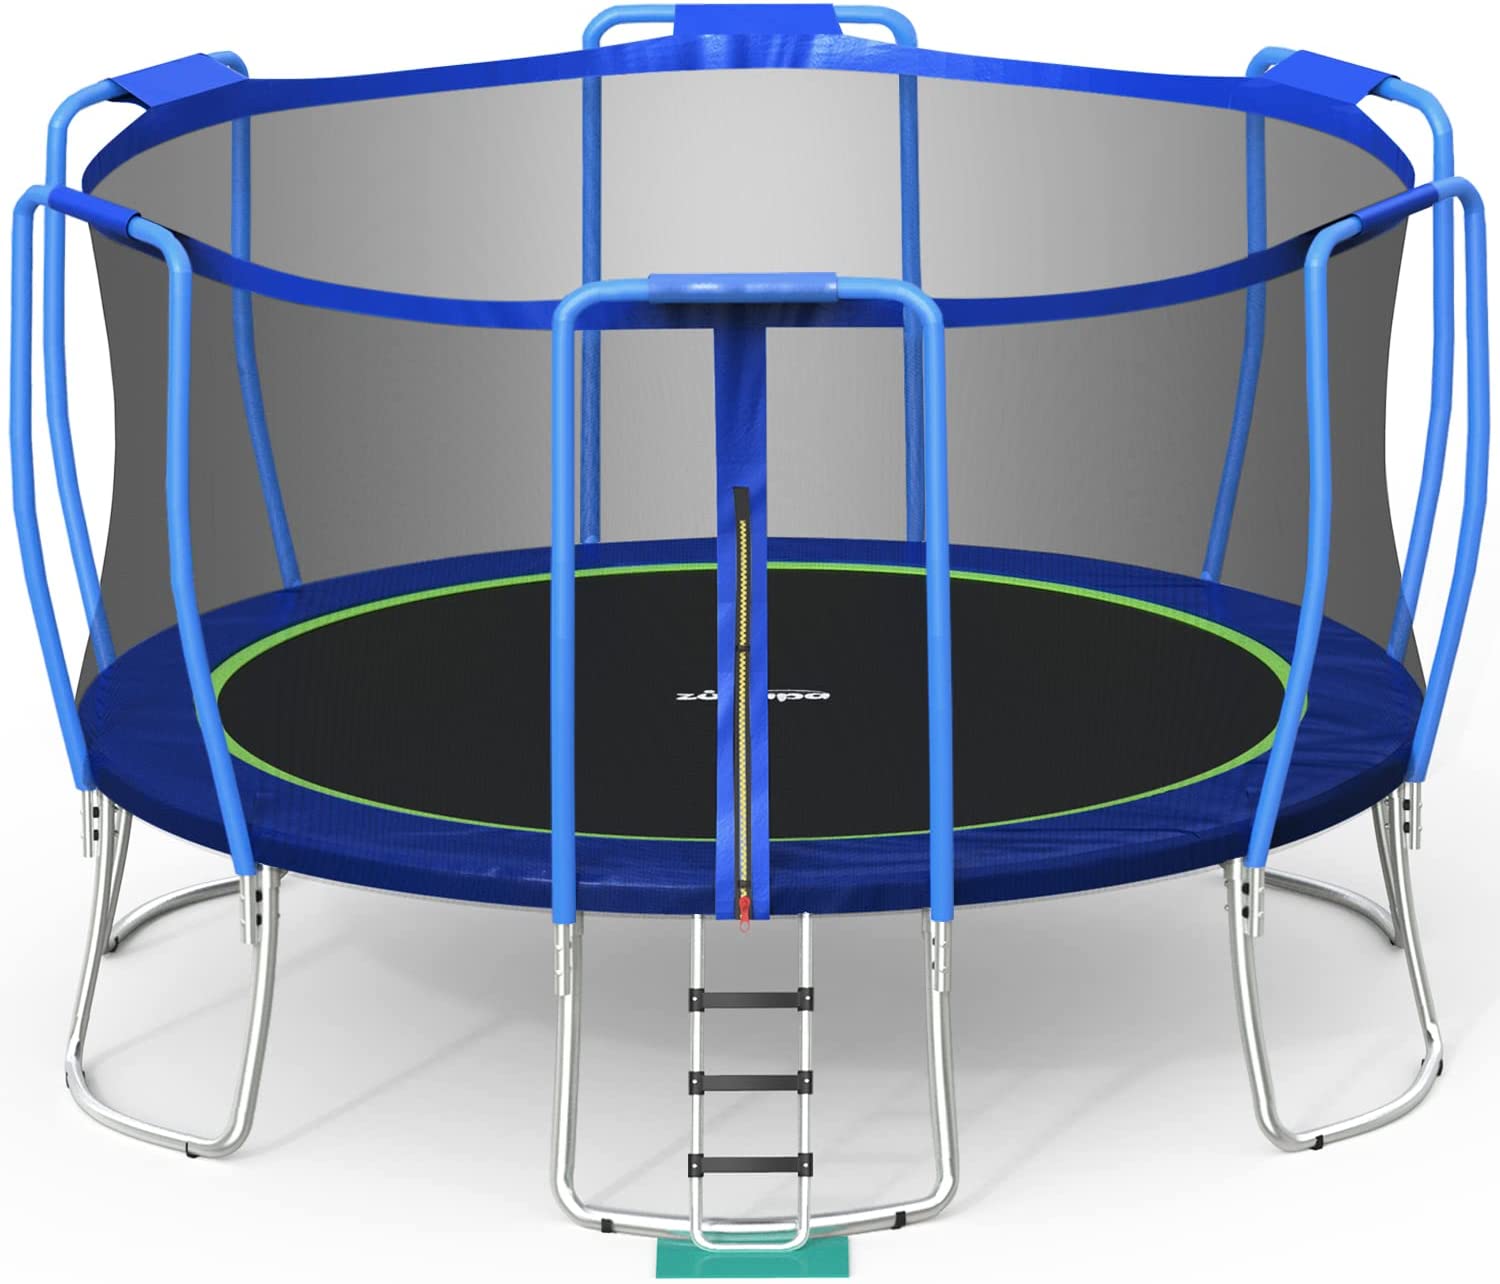 Zupapa 15FT 14FT 12FT 10FT 8FT Kids Trampoline 425LBS Weight Capacity With  ダイエット器具